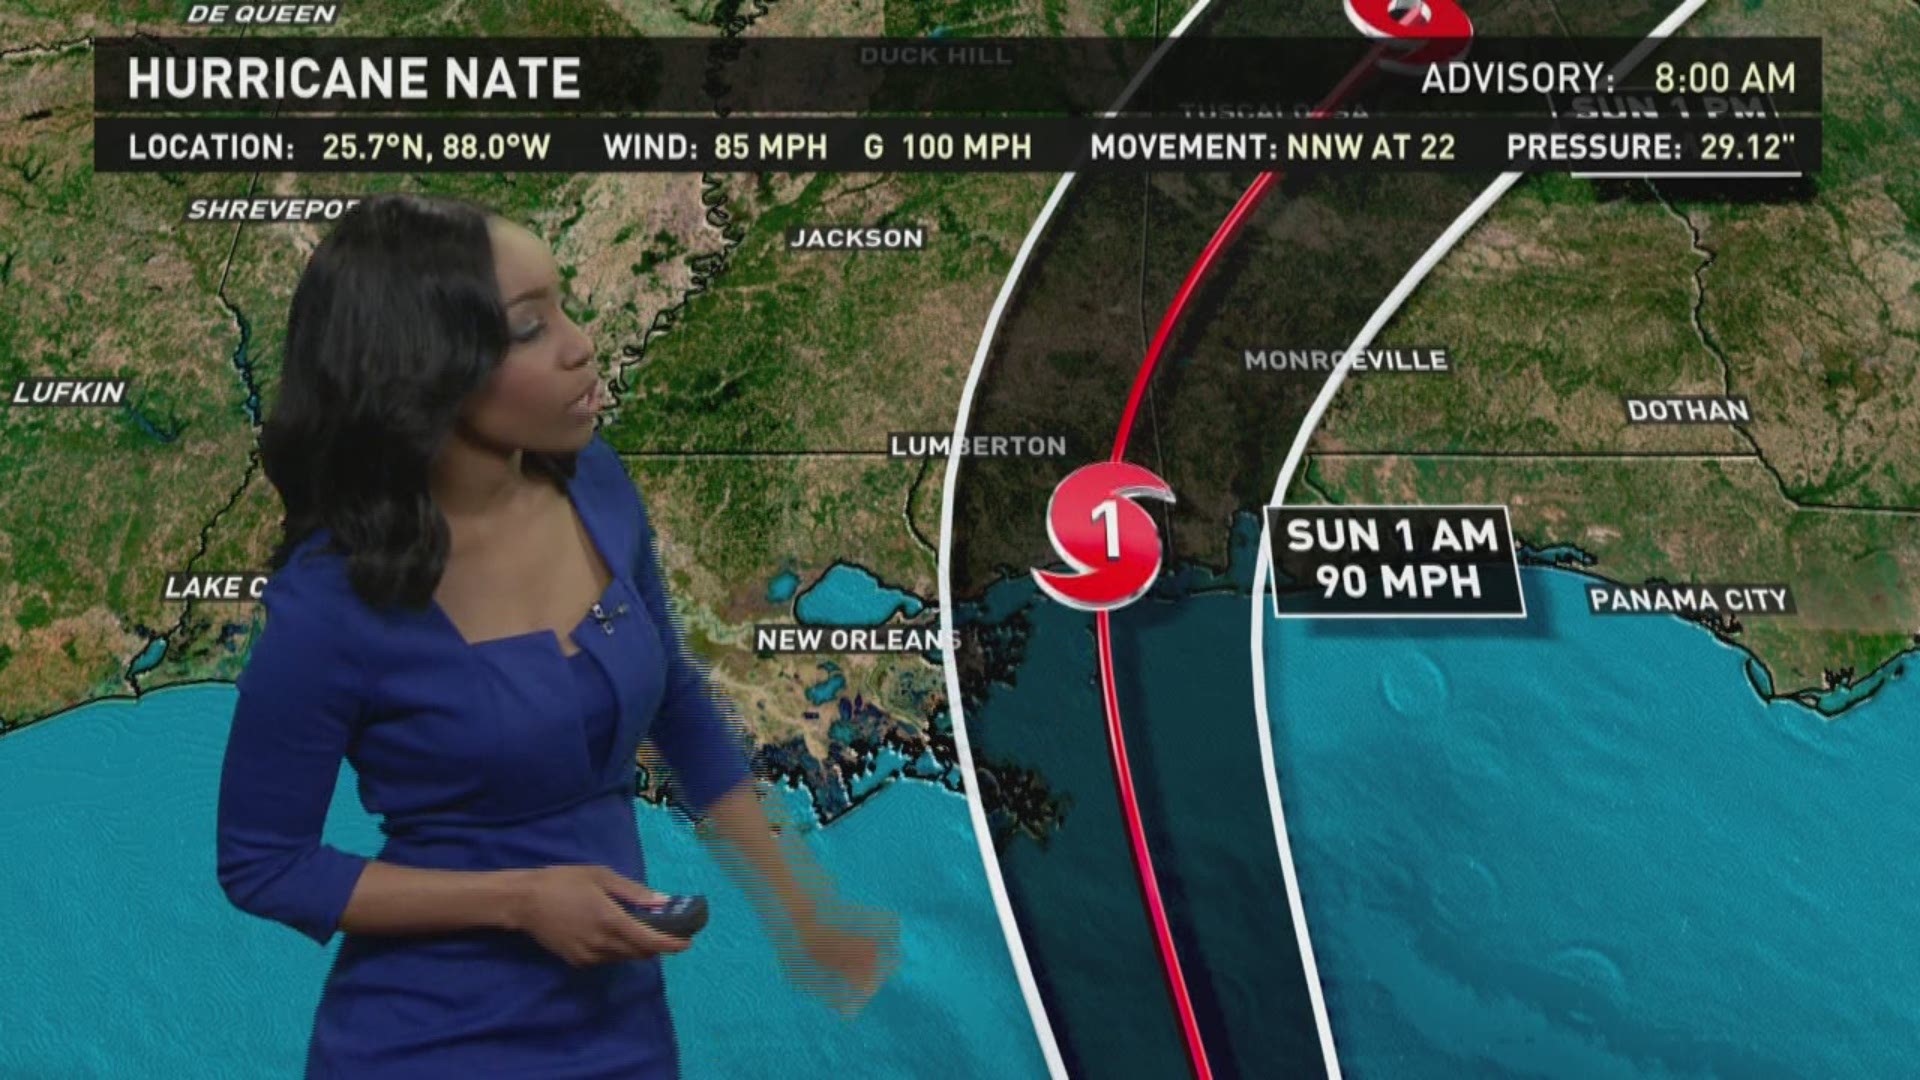 13News Now meteorologist Iisha Scott has the latest on a strengthening Tropical Storm Nate, and where along the Gulf Coast it can be expected to make landfall.